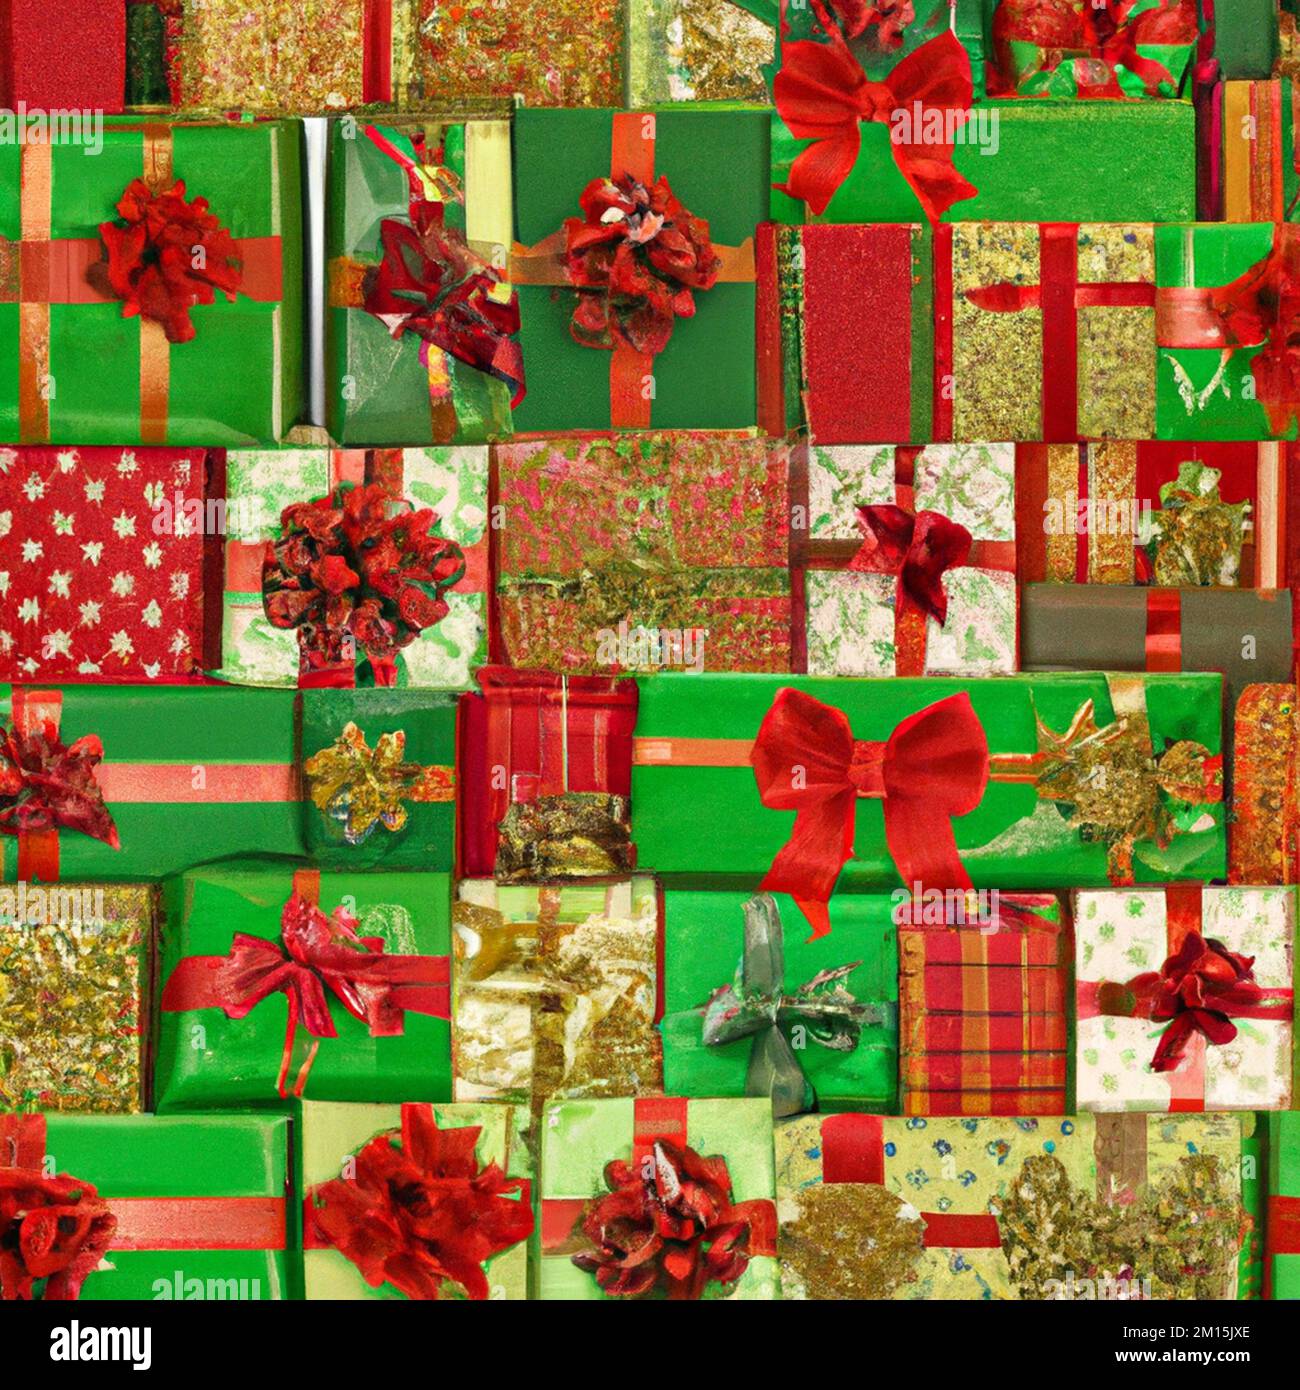 Holiday gift packages, wrapped green boxes, with gold ribbons and red bows. Background with colorful decorated gift boxes. Stock Photo